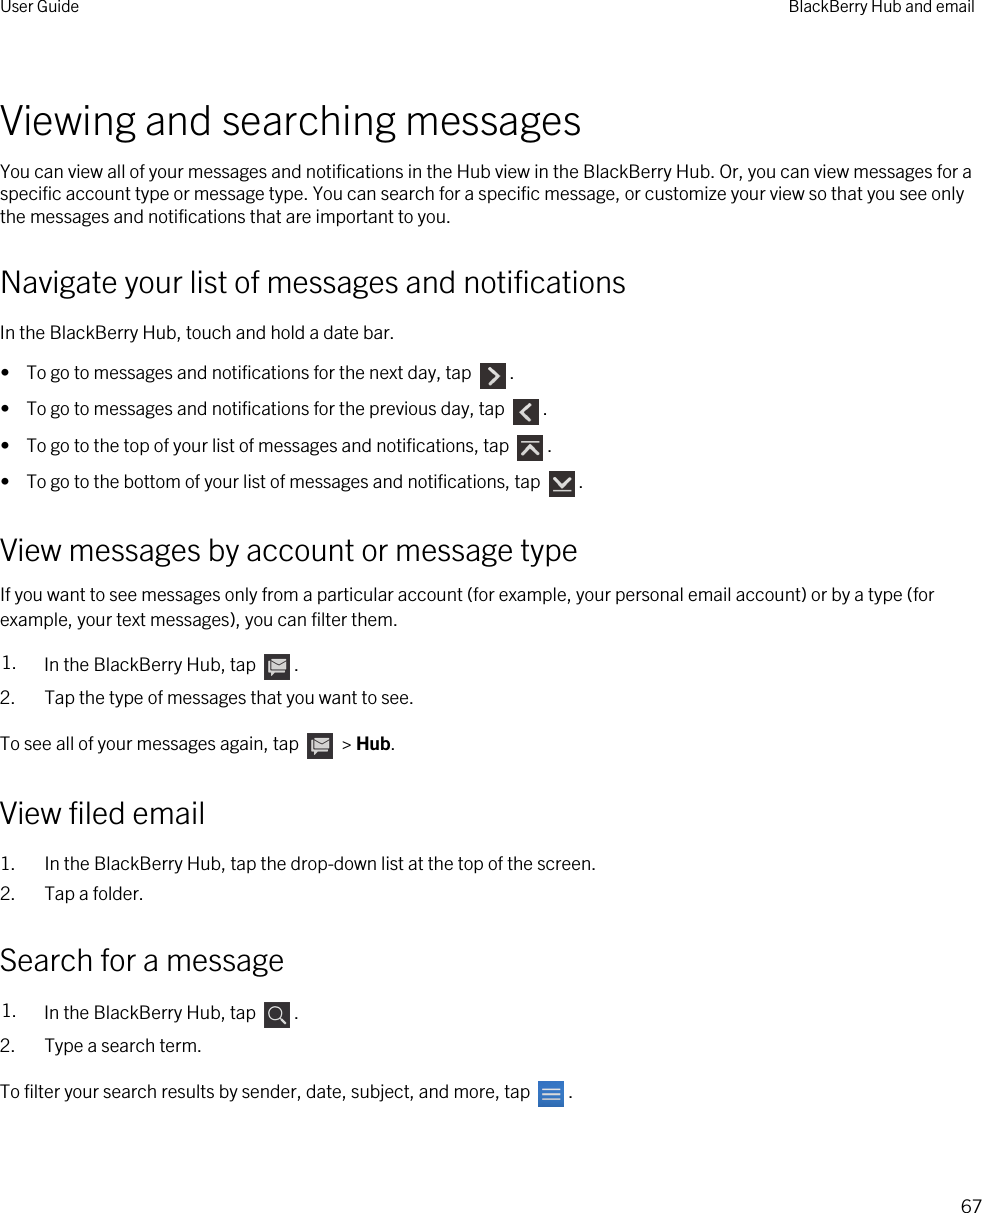 Viewing and searching messagesYou can view all of your messages and notifications in the Hub view in the BlackBerry Hub. Or, you can view messages for a specific account type or message type. You can search for a specific message, or customize your view so that you see only the messages and notifications that are important to you.Navigate your list of messages and notificationsIn the BlackBerry Hub, touch and hold a date bar.•  To go to messages and notifications for the next day, tap  .•  To go to messages and notifications for the previous day, tap  .•  To go to the top of your list of messages and notifications, tap  .•  To go to the bottom of your list of messages and notifications, tap  .View messages by account or message typeIf you want to see messages only from a particular account (for example, your personal email account) or by a type (for example, your text messages), you can filter them.1. In the BlackBerry Hub, tap  .2. Tap the type of messages that you want to see.To see all of your messages again, tap   &gt; Hub.View filed email1. In the BlackBerry Hub, tap the drop-down list at the top of the screen.2. Tap a folder.Search for a message1. In the BlackBerry Hub, tap  .2. Type a search term.To filter your search results by sender, date, subject, and more, tap  .User Guide BlackBerry Hub and email67